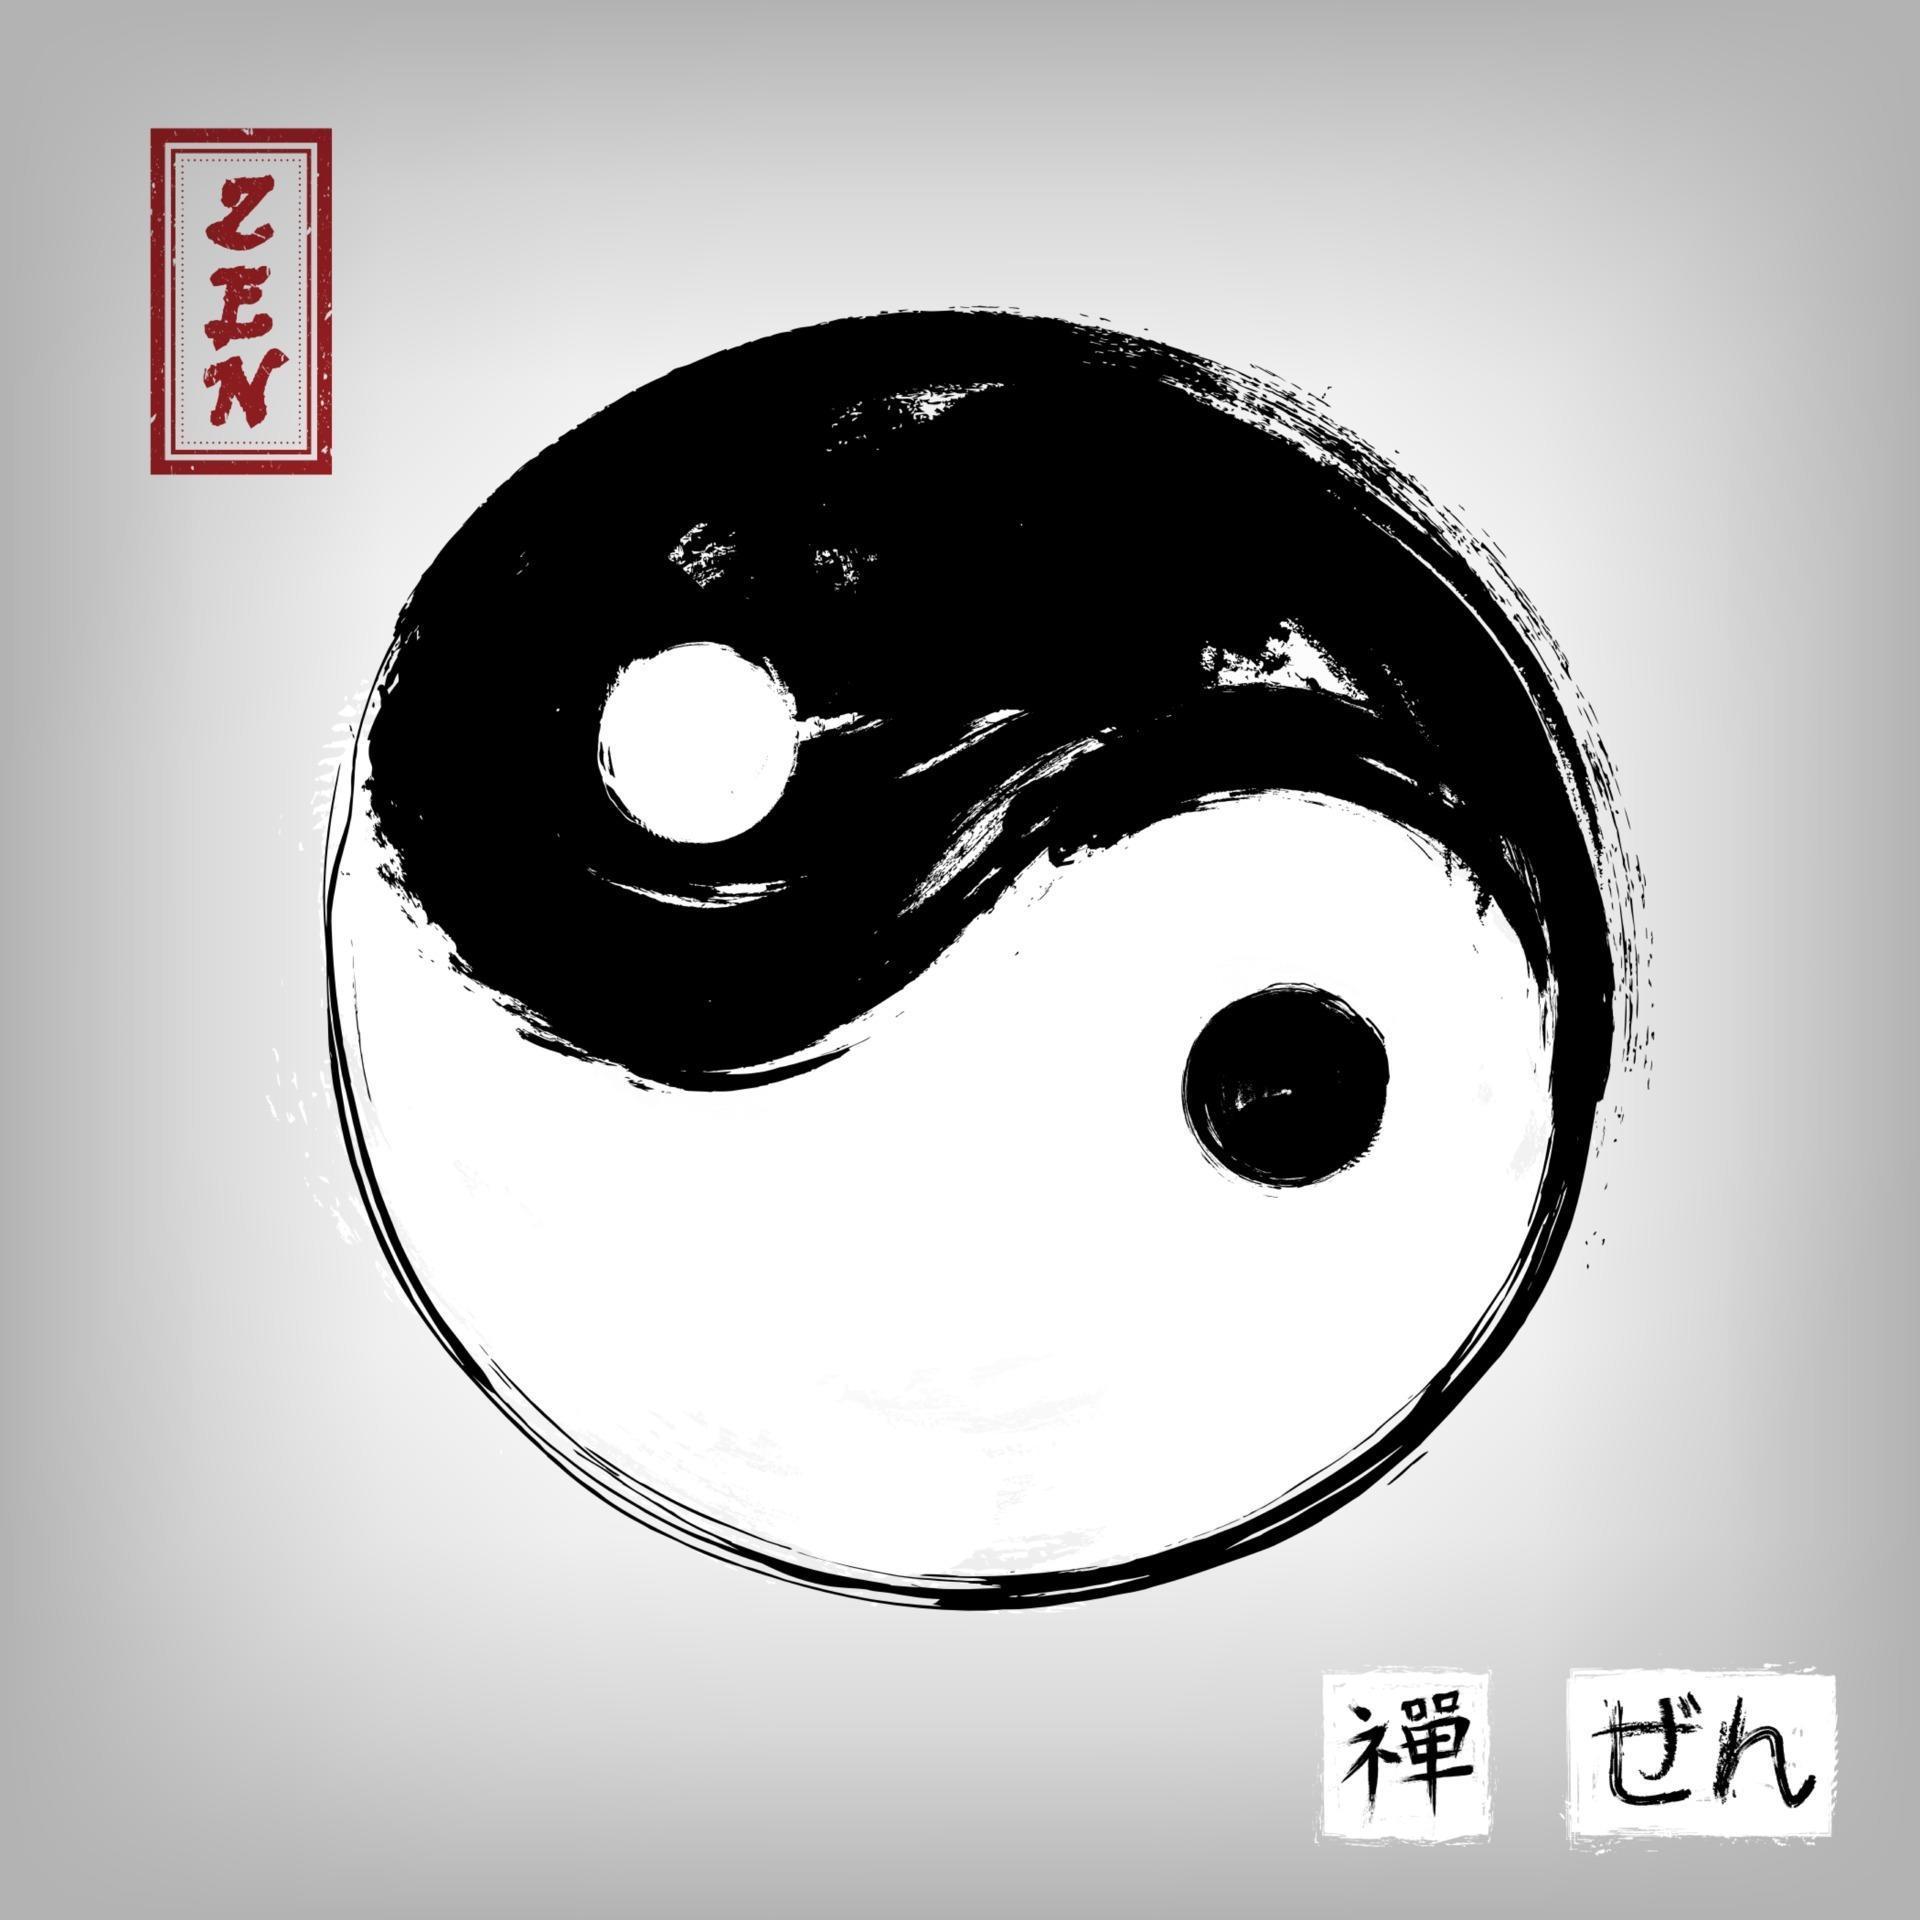 Yin Yang With Kanji Calligraphic Chinese Japanese Alphabet Translation Meaning Zen Watercolor Painting Design Buddhism Religion Concept Vector Art At Vecteezy